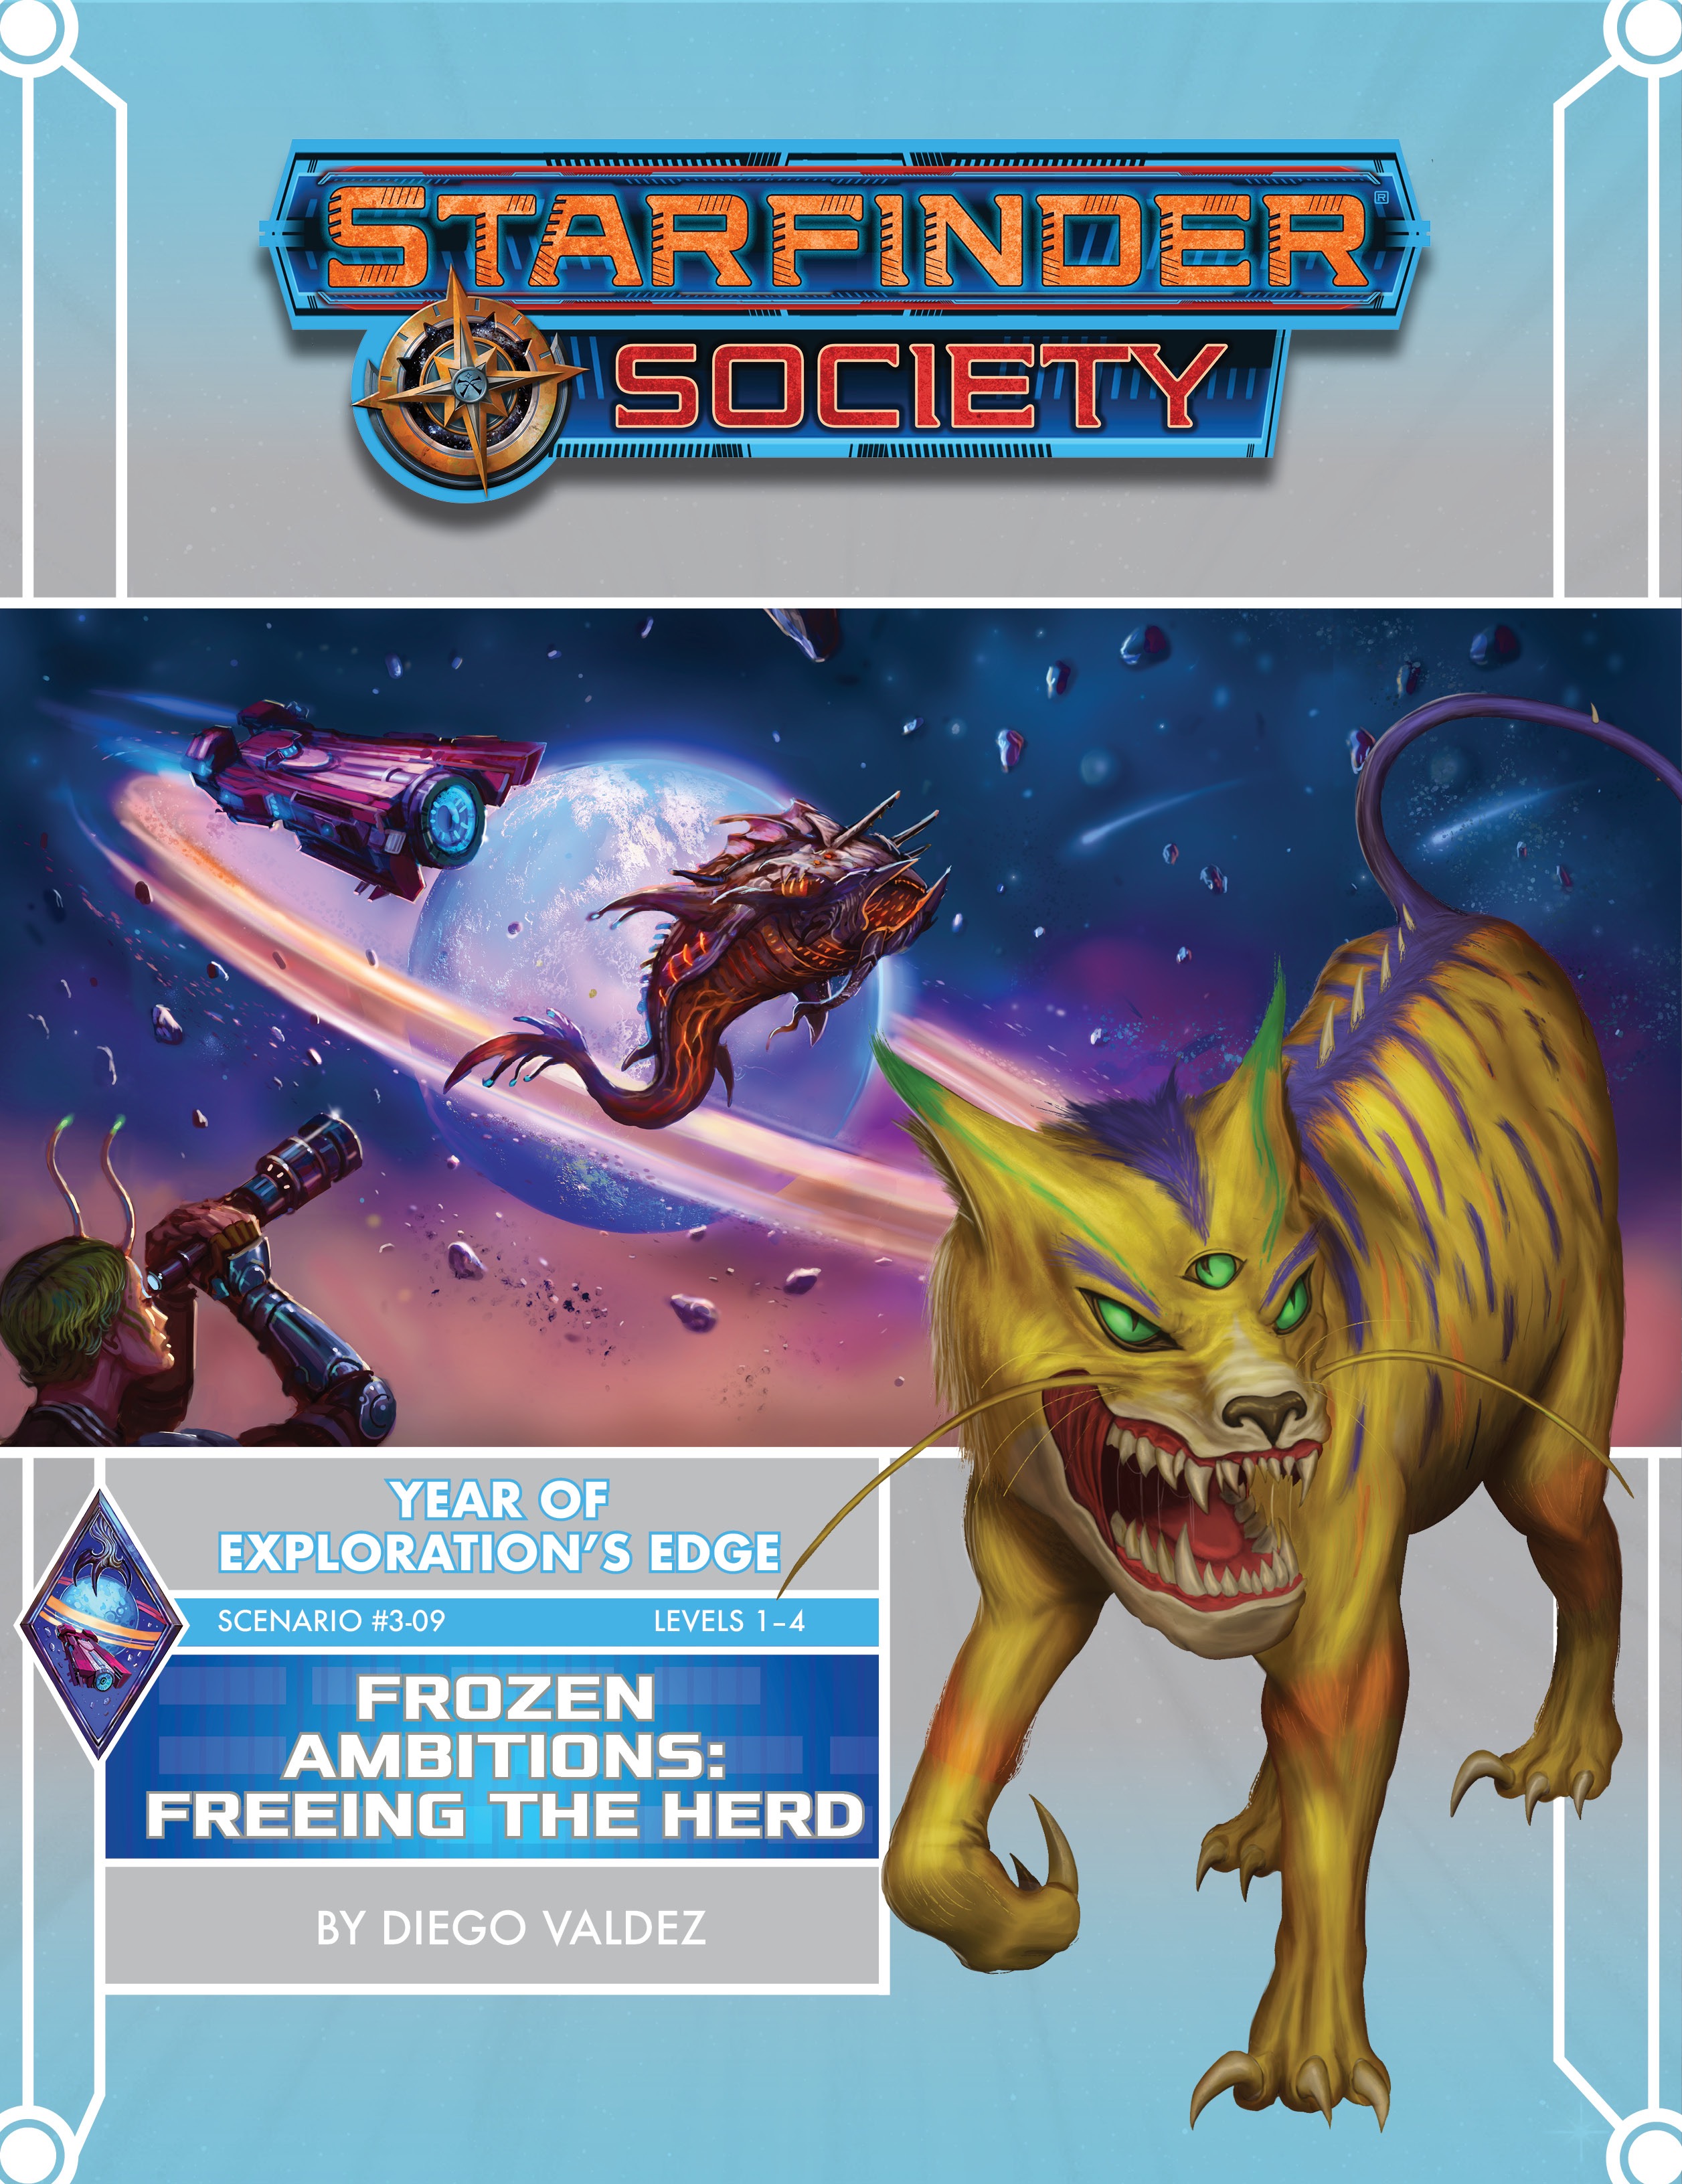 Starfinder Society, Frozen Ambitions: Freeing the Herd. A dog-like bipedal alien in a spacesuit